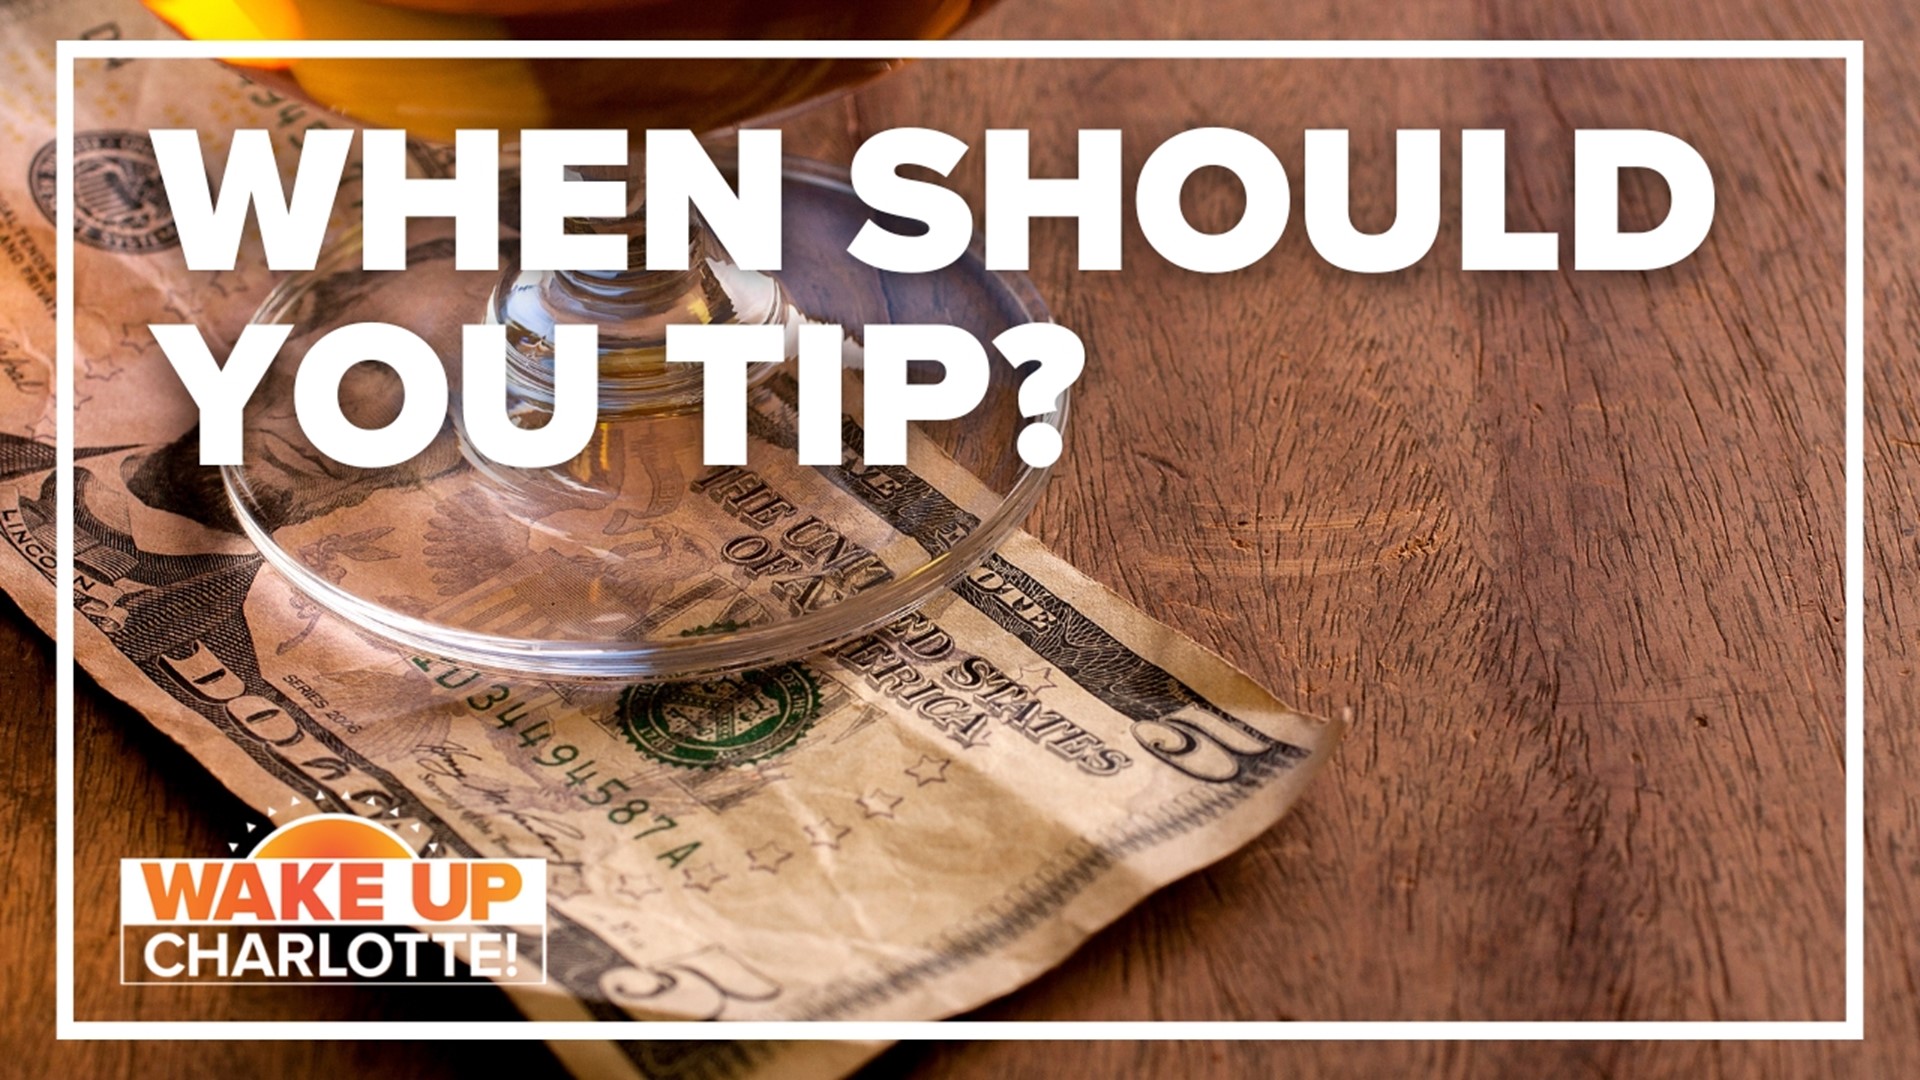 A debate is raging about tipping culture in the U.S. as some say it is more convoluted and confusing than ever before